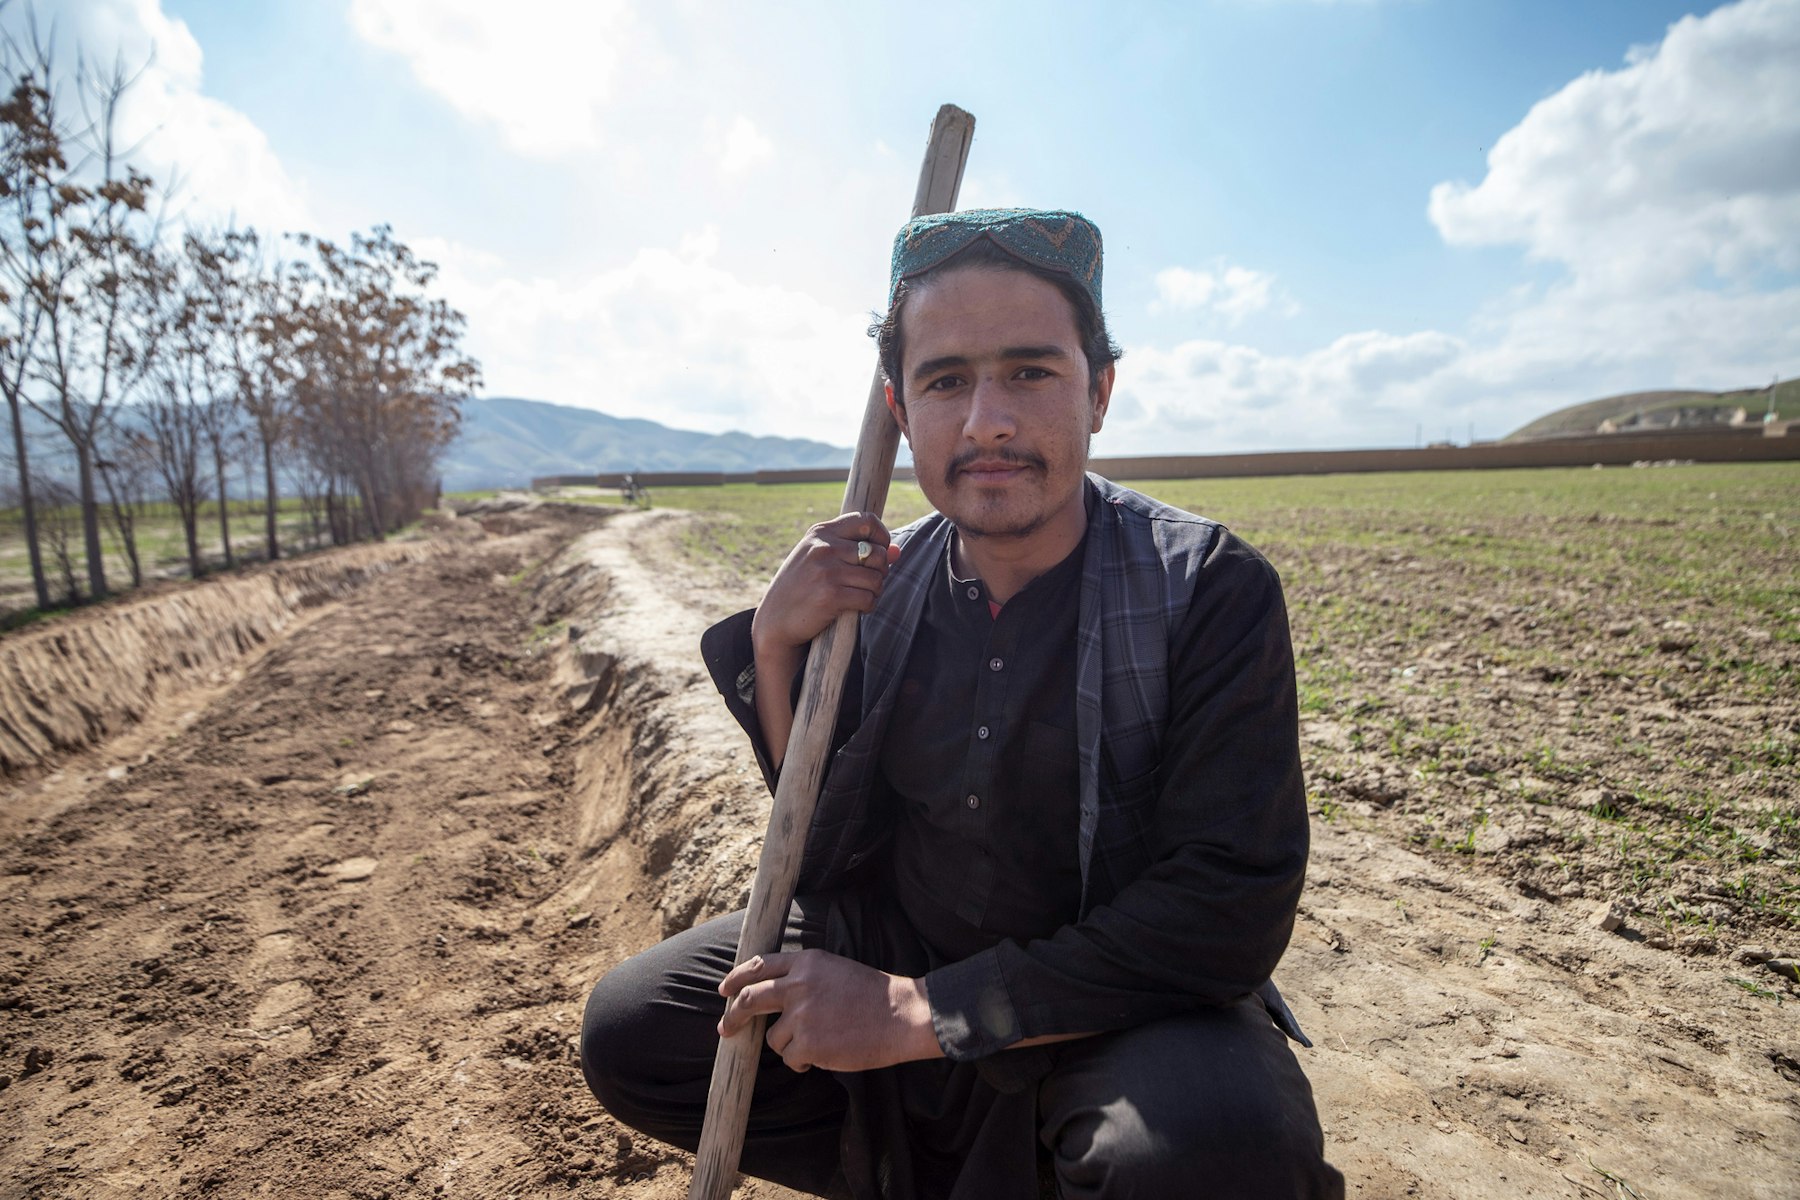 Abdul Bari is 24 years old. In Baghlan, he is working with AKF to help cultivate and irrigate agricultural land. There isn’t always work like this available to young men like him, but the province is highly dependent on agriculture and AKF is committed to creating jobs in this sector to build economic resilience. “Most young people are forced to leave the country because they do not have a job. I was very worried that I would have to do that too, but now I am happy and hope that I will find more work soon.”